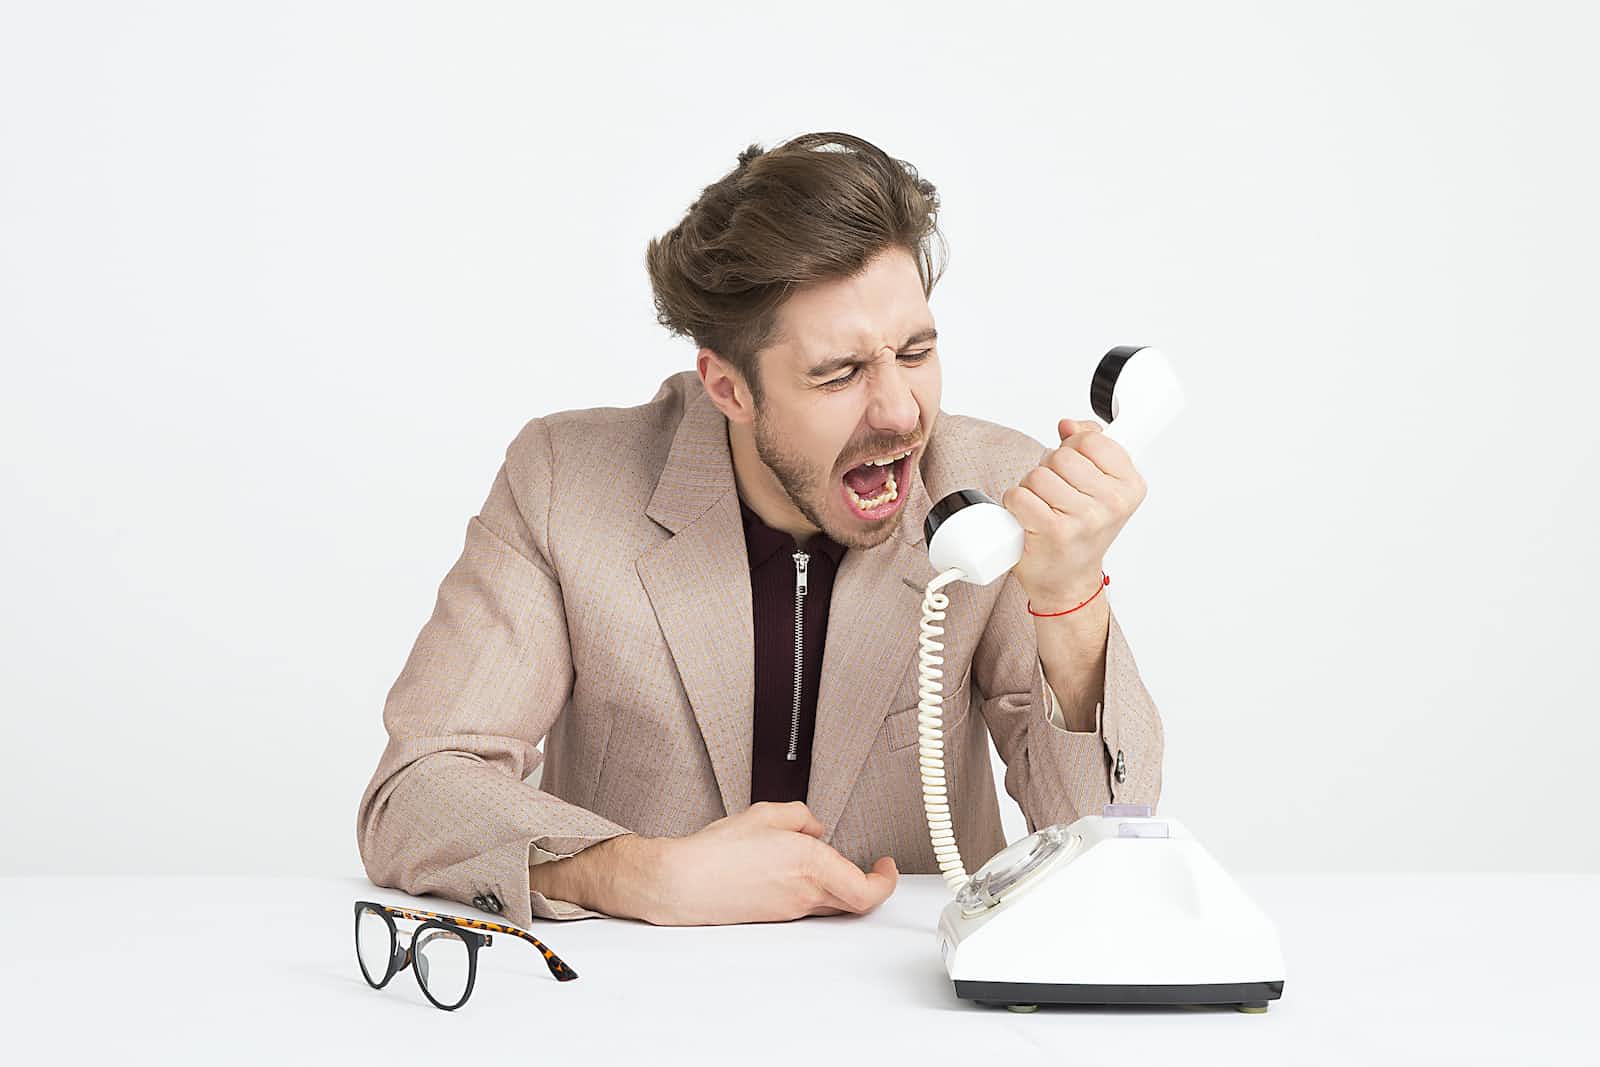 A man with his glasses removed, wearing a suit, angrily yelling at a telephone receiver